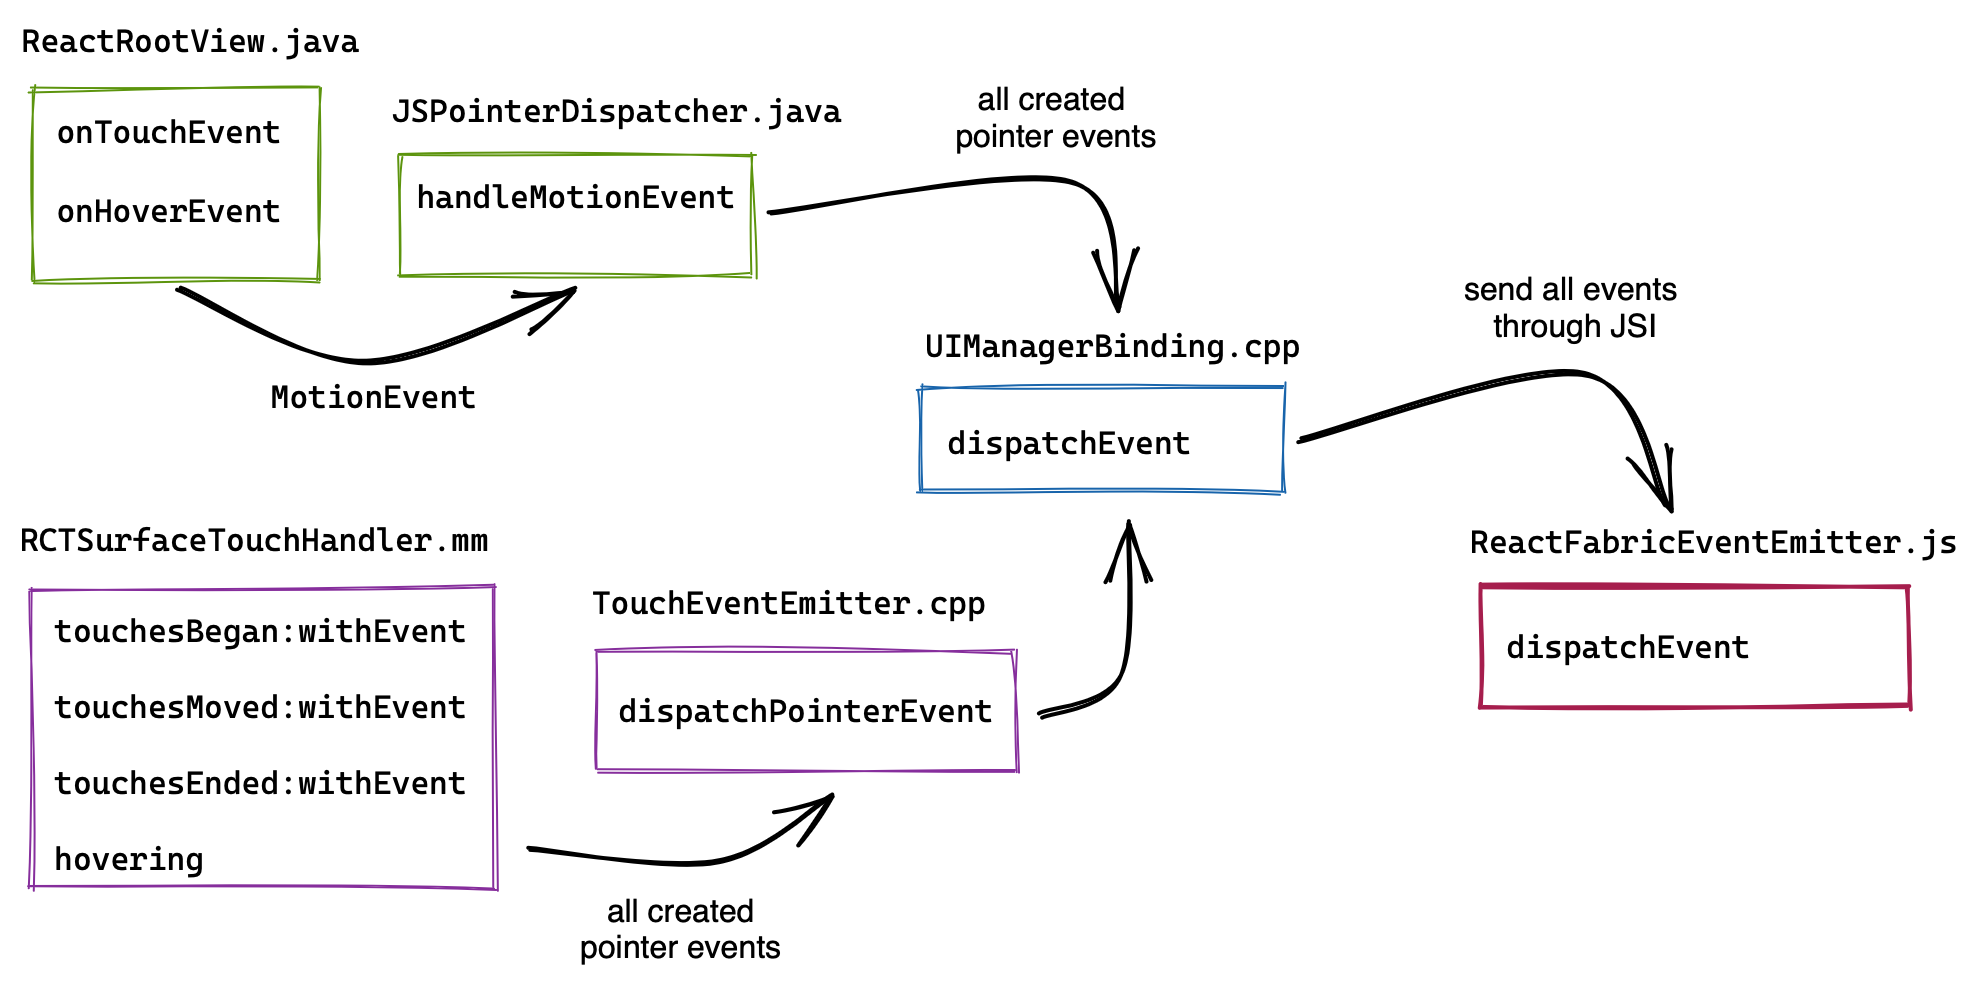 Diagram of code flow for interpreting Android and iOS UI input events into Pointer Events. On Android, input handlers &quot;onTouchEvent&quot; and &quot;onHoverEvent&quot; fire &quot;MotionEvents&quot; that are interpreted into Pointer Events and through JSI are dispatched to the React renderer. iOS takes a similar path with input handlers &quot;touchesBegan&quot;, &quot;touchesMoved&quot;, &quot;touchesEnded&quot;, and &quot;hovering&quot; interpreting &quot;UITouch&quot; and &quot;UIEvent&quot; into Pointer Events.